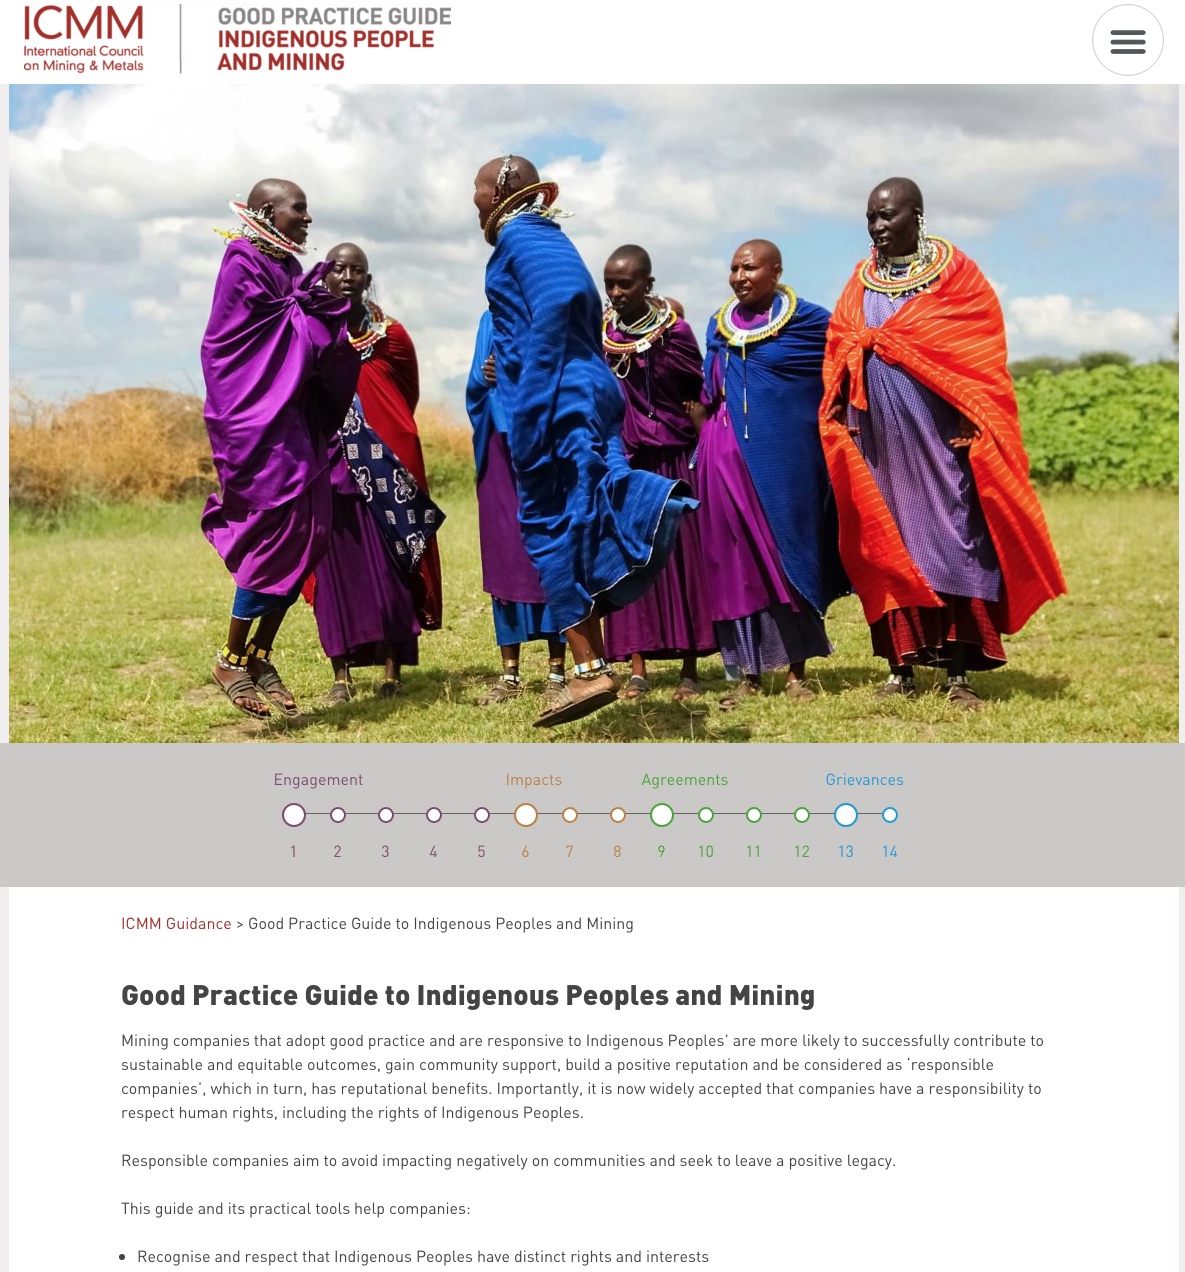 Good Practice Guide to Indigenous Peoples and Mining